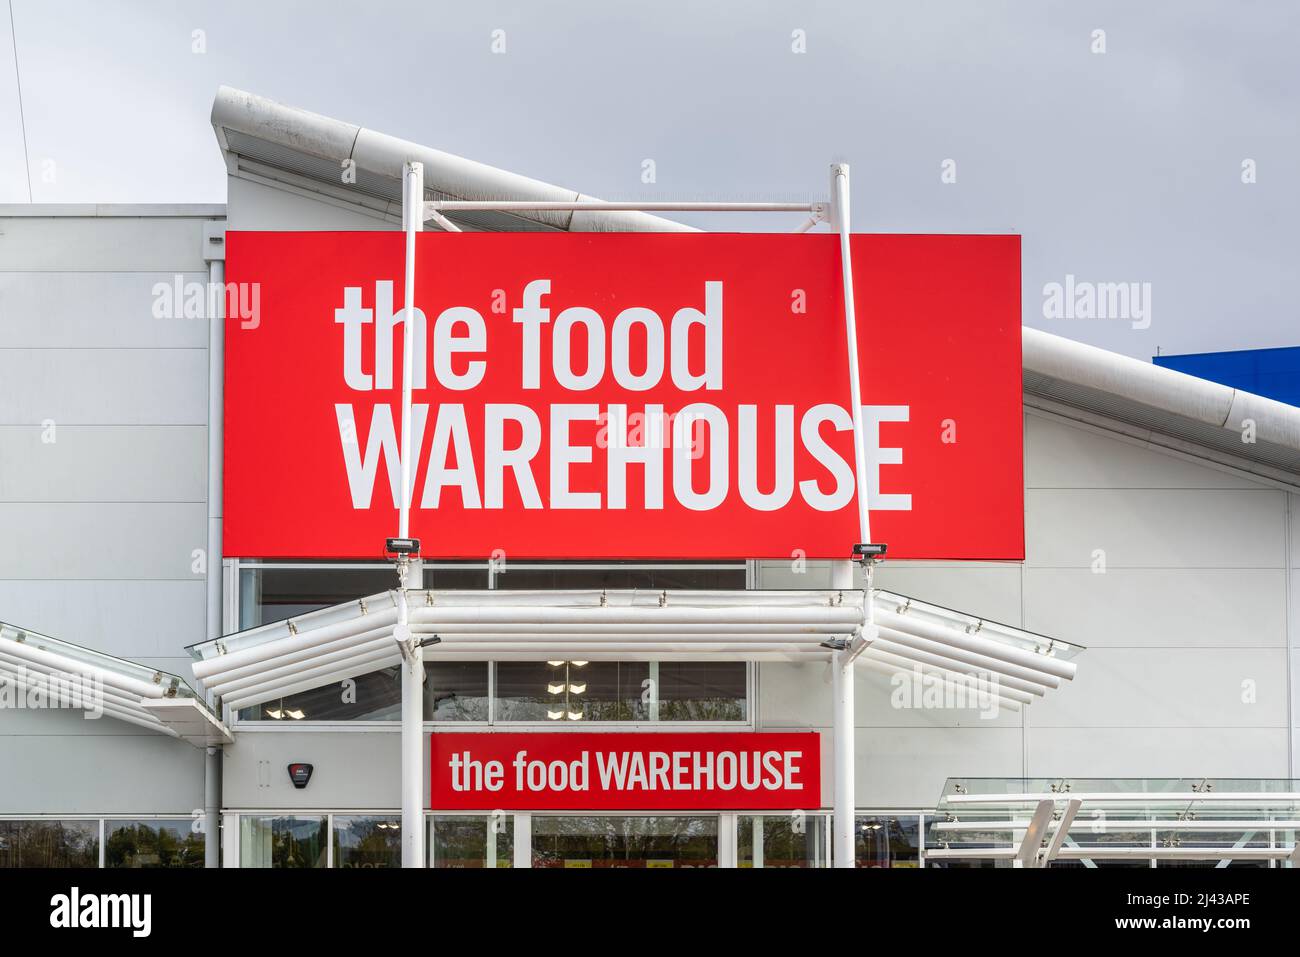 the food Warehouse - British supermarket chain owned by Iceland foods group in Southampton, England, UK Stock Photo